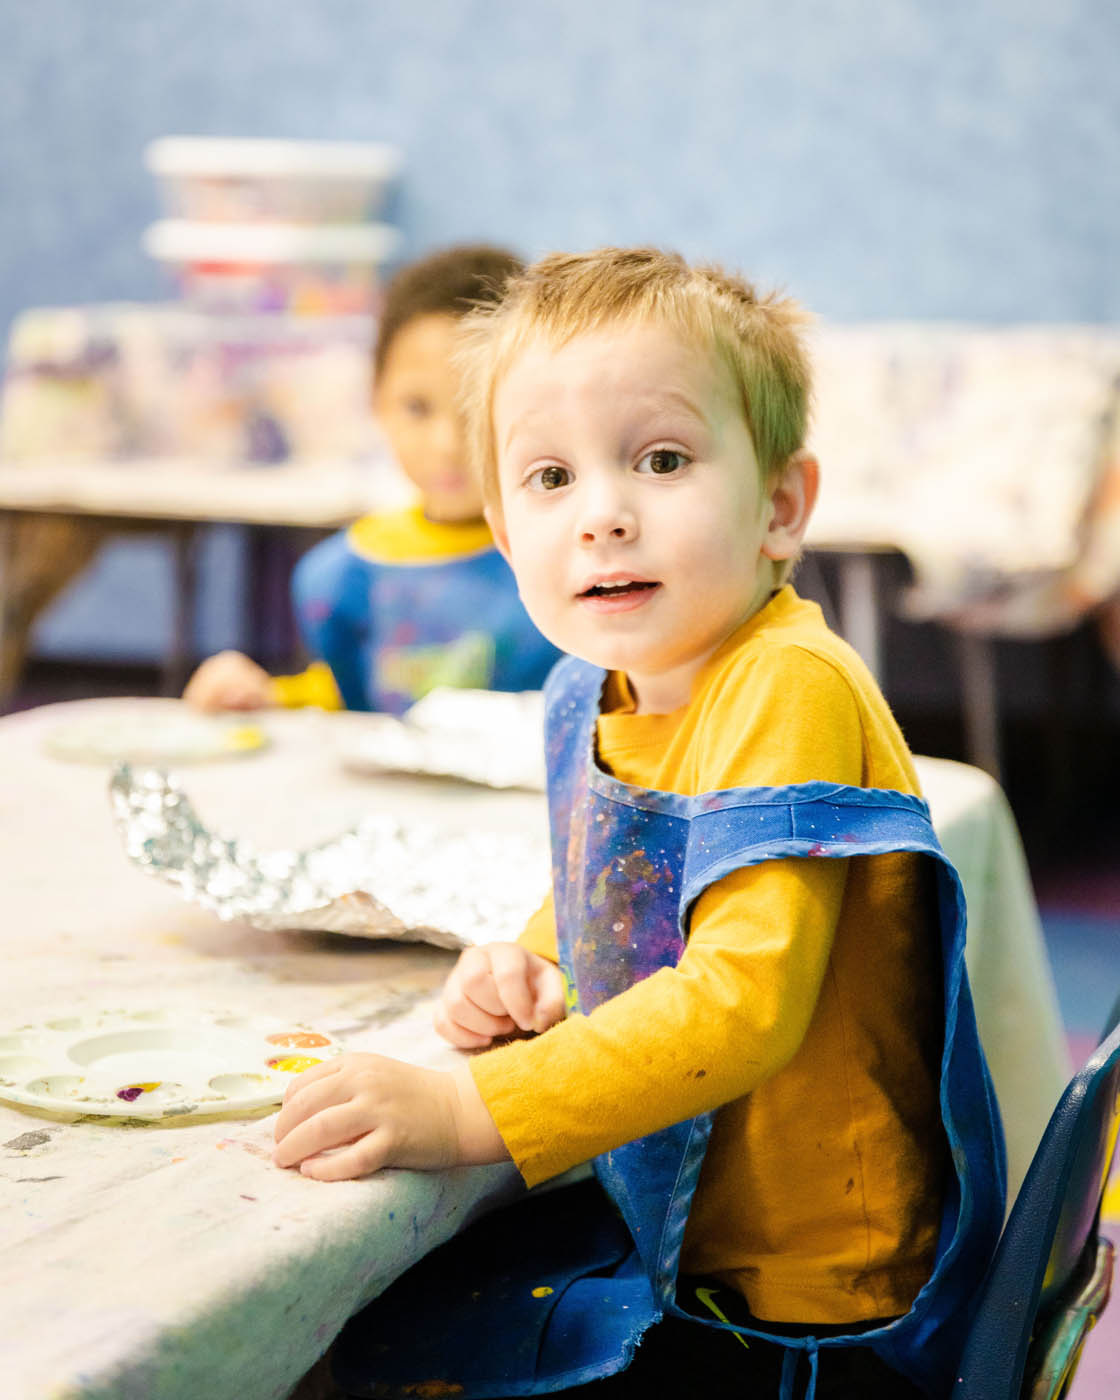 A boy in a yellow shirt in a Midlothian toddler art class at Romp n' Roll.